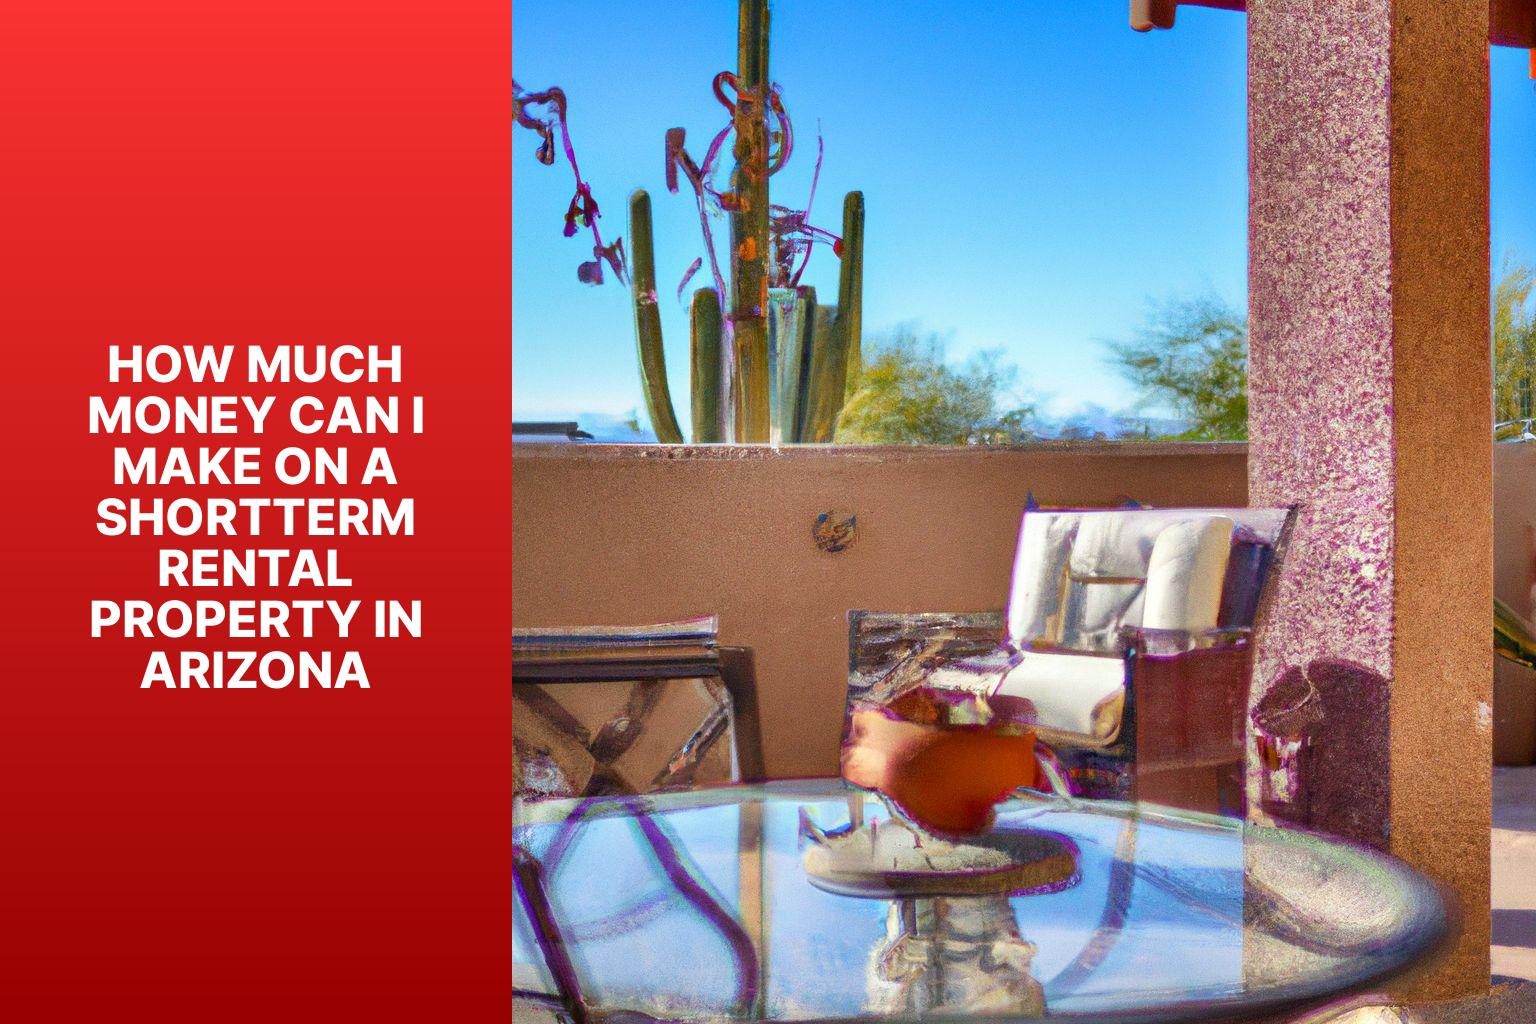 How much money can I make on a shortterm rental property in Arizona